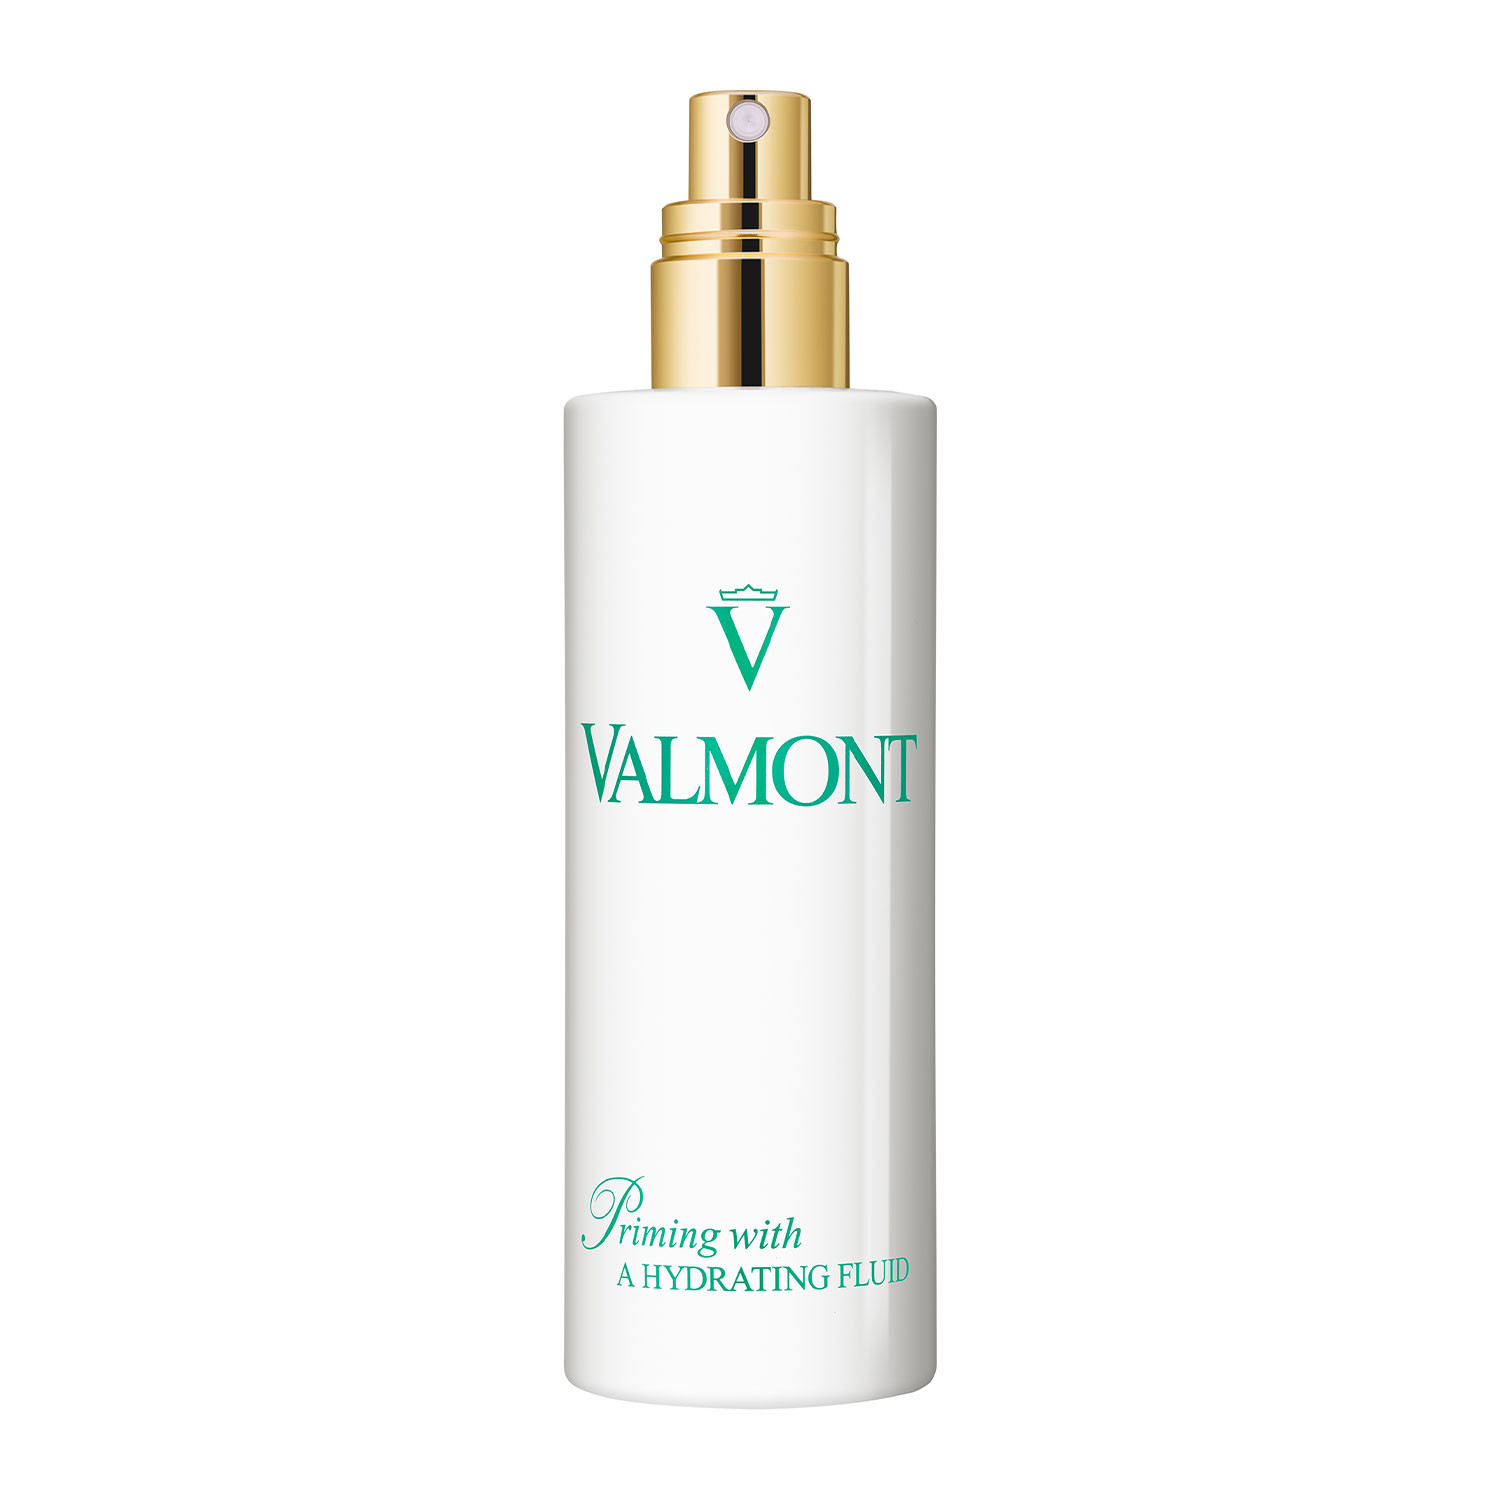 valmont priming with a hydrating fluid купить
